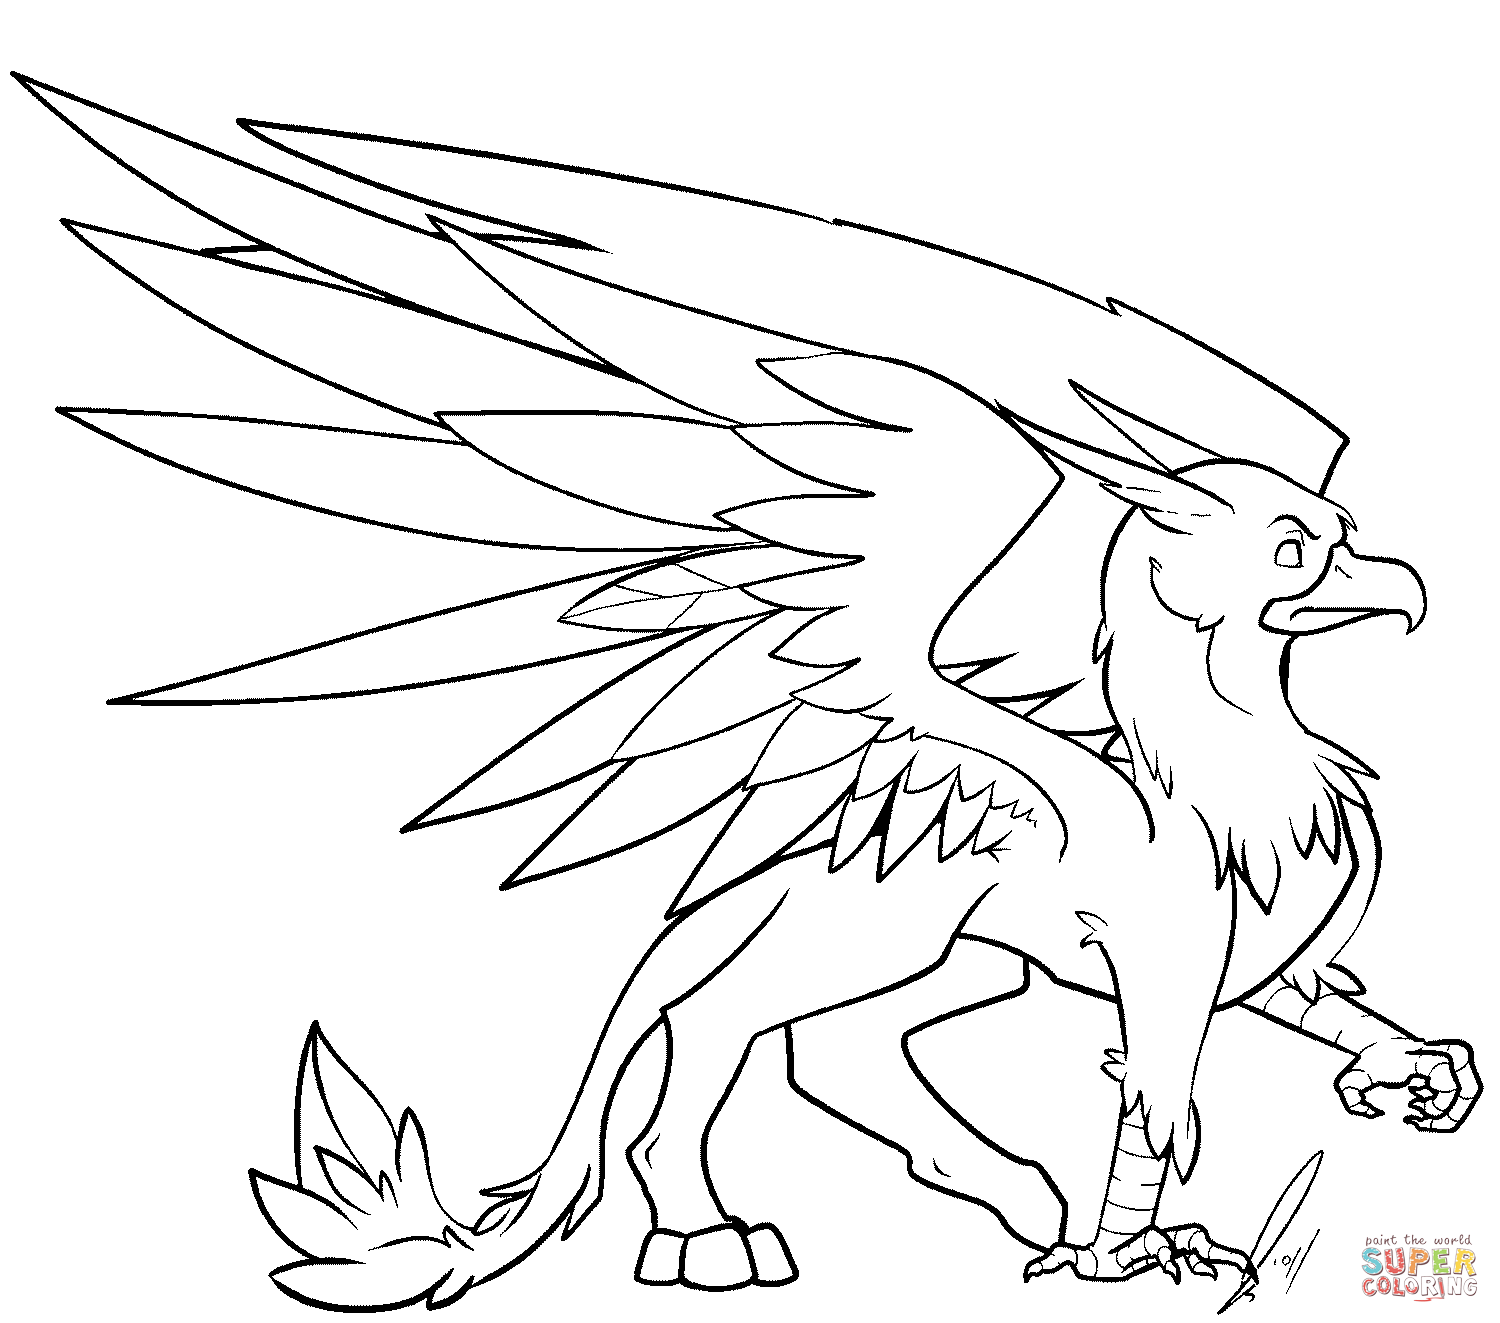 Griffin coloring #3, Download drawings